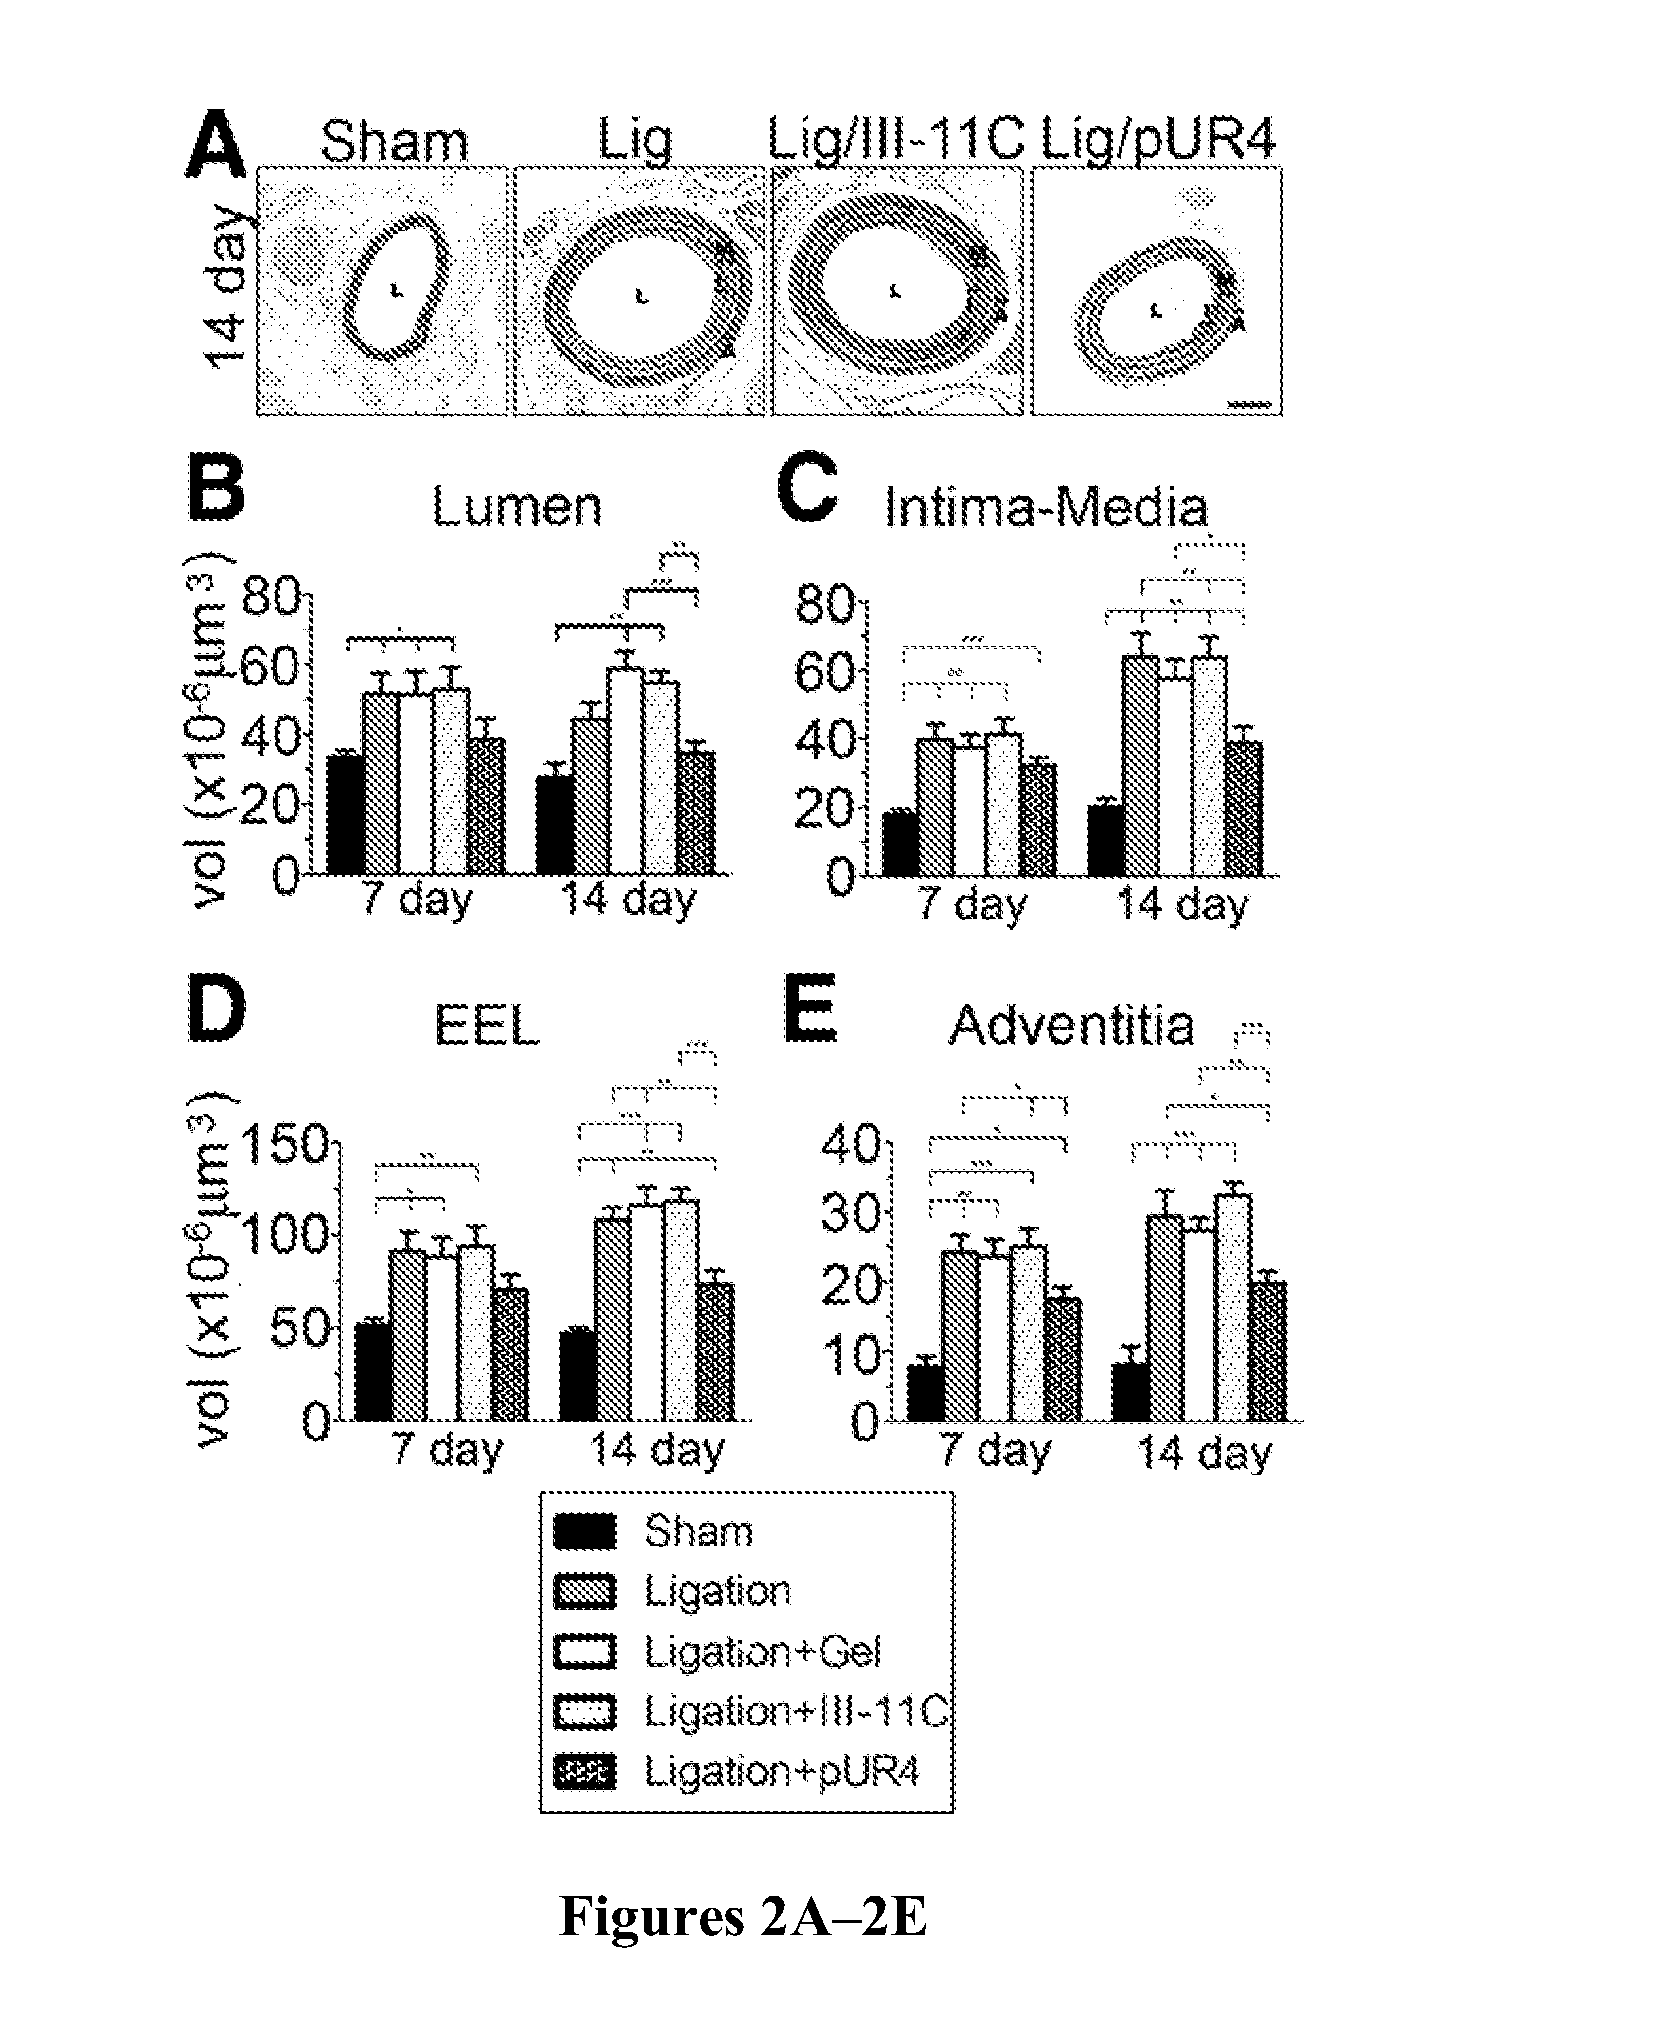 Treatment of fibrosis-related disorders using fibronectin binding proteins and polypeptides